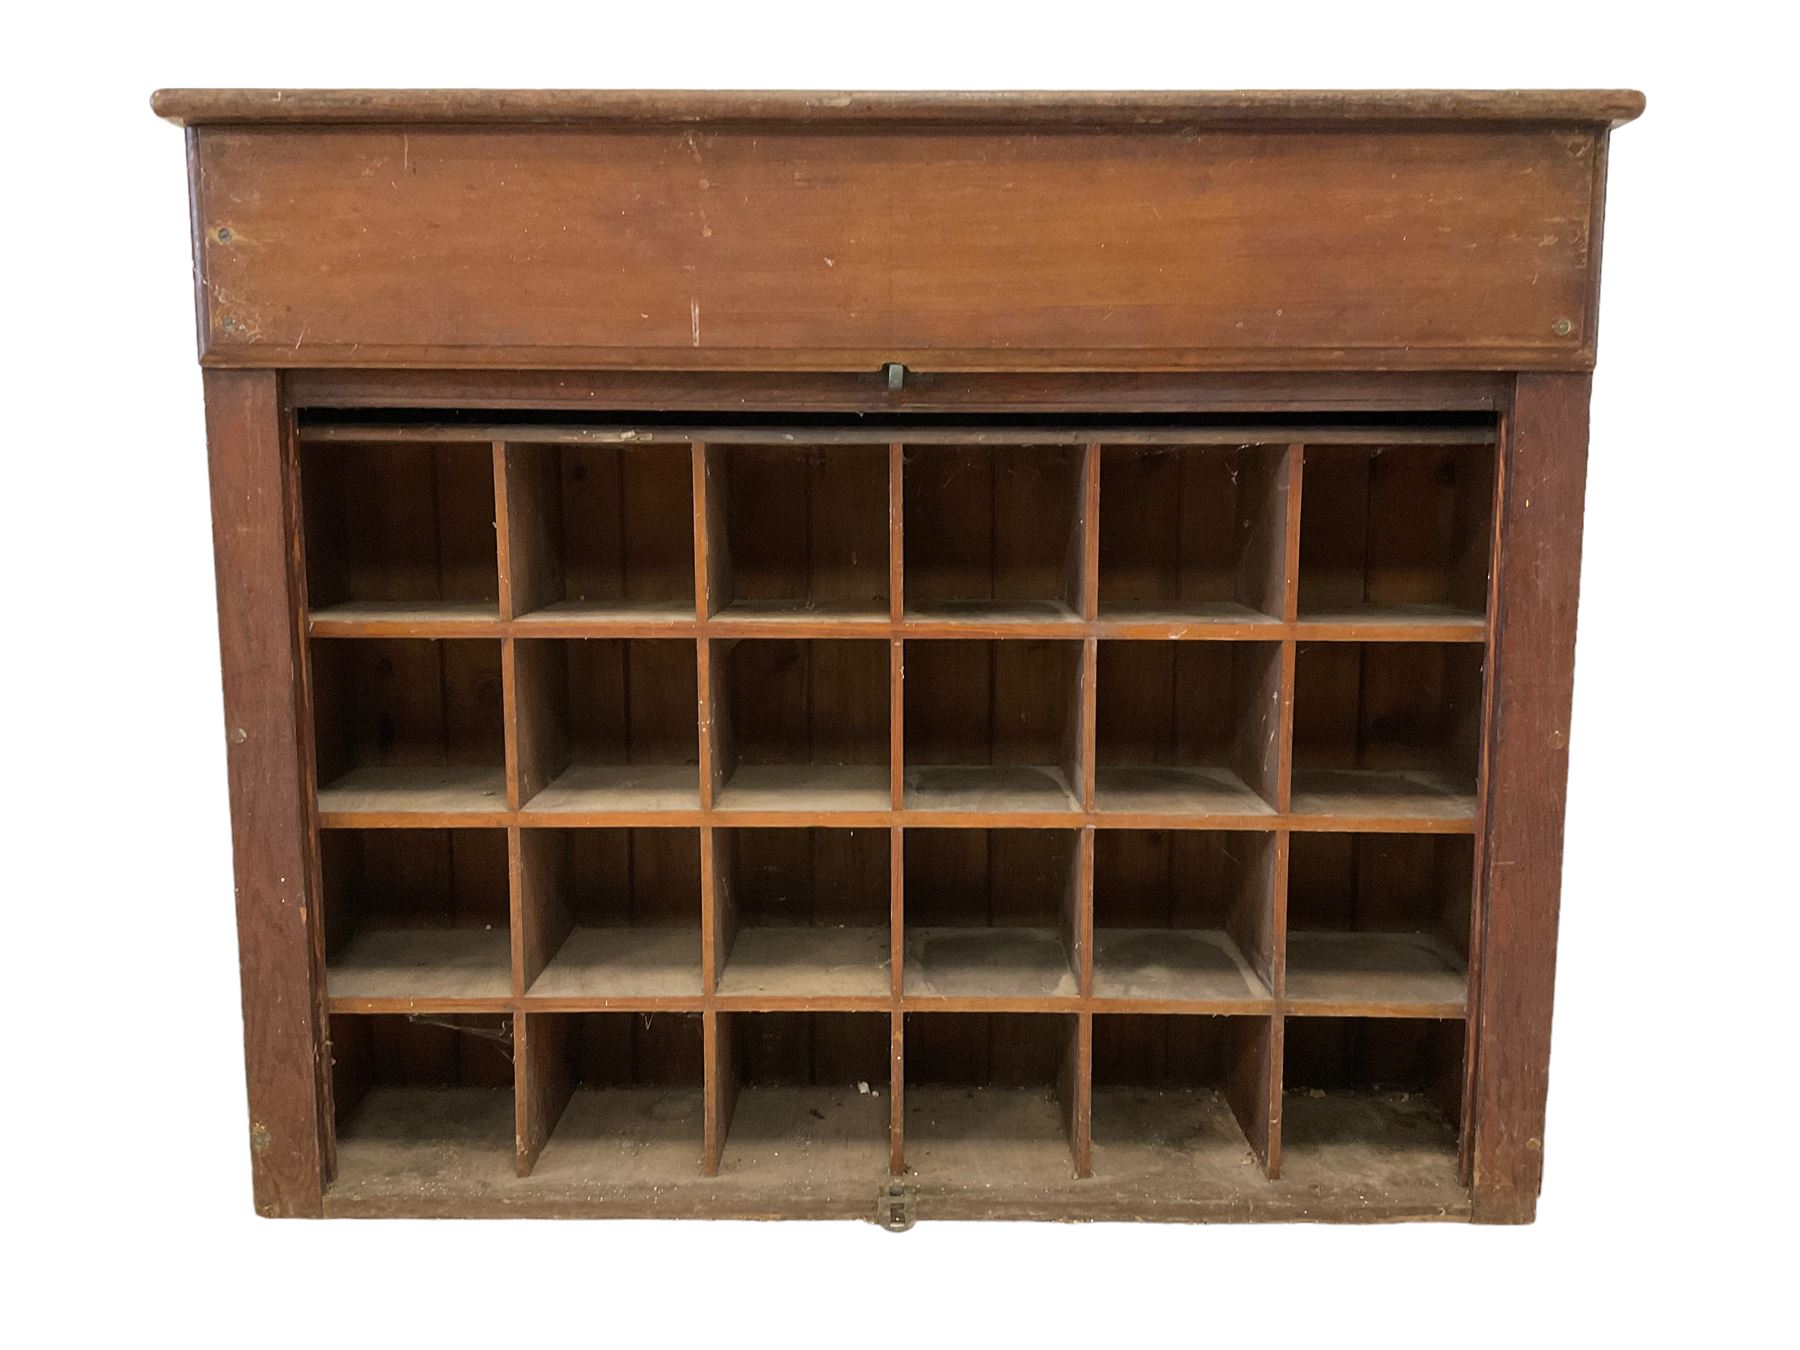 19th century oak hotel or post office pigeonhole cabinet - Image 6 of 6